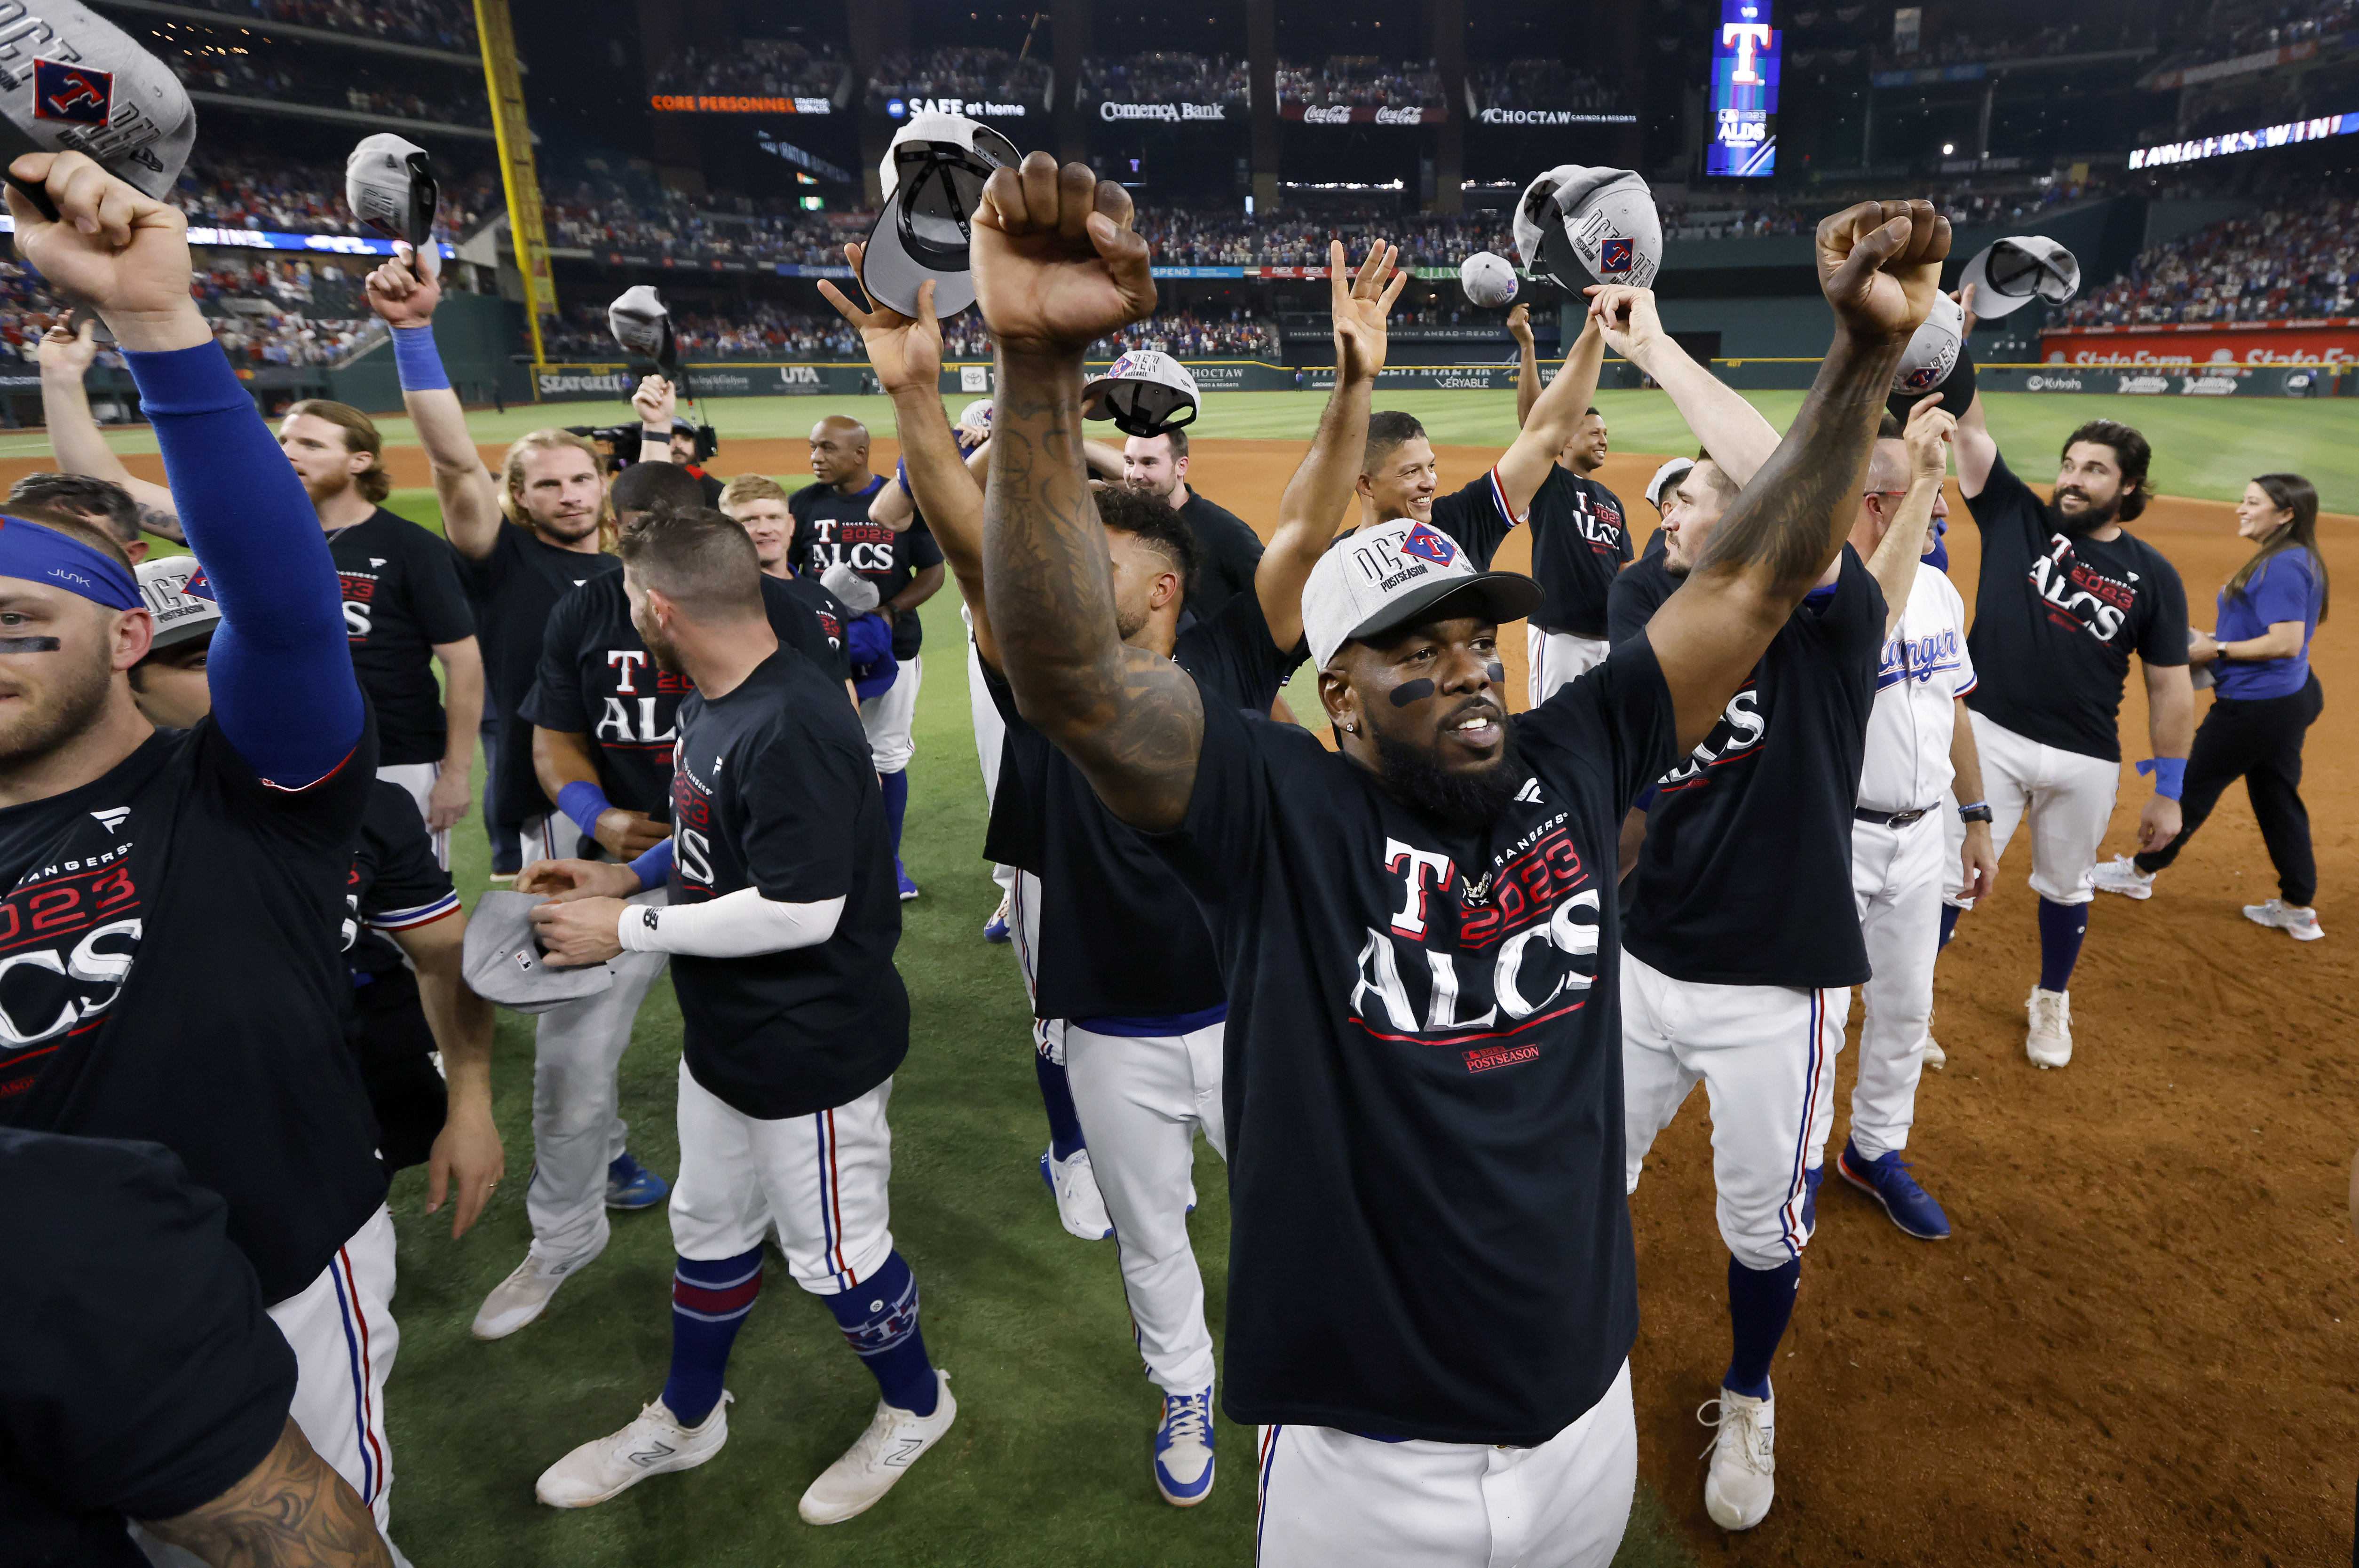 Rangers fans chanted 'We want Houston' after ALDS-clincher. Now, they've  got them